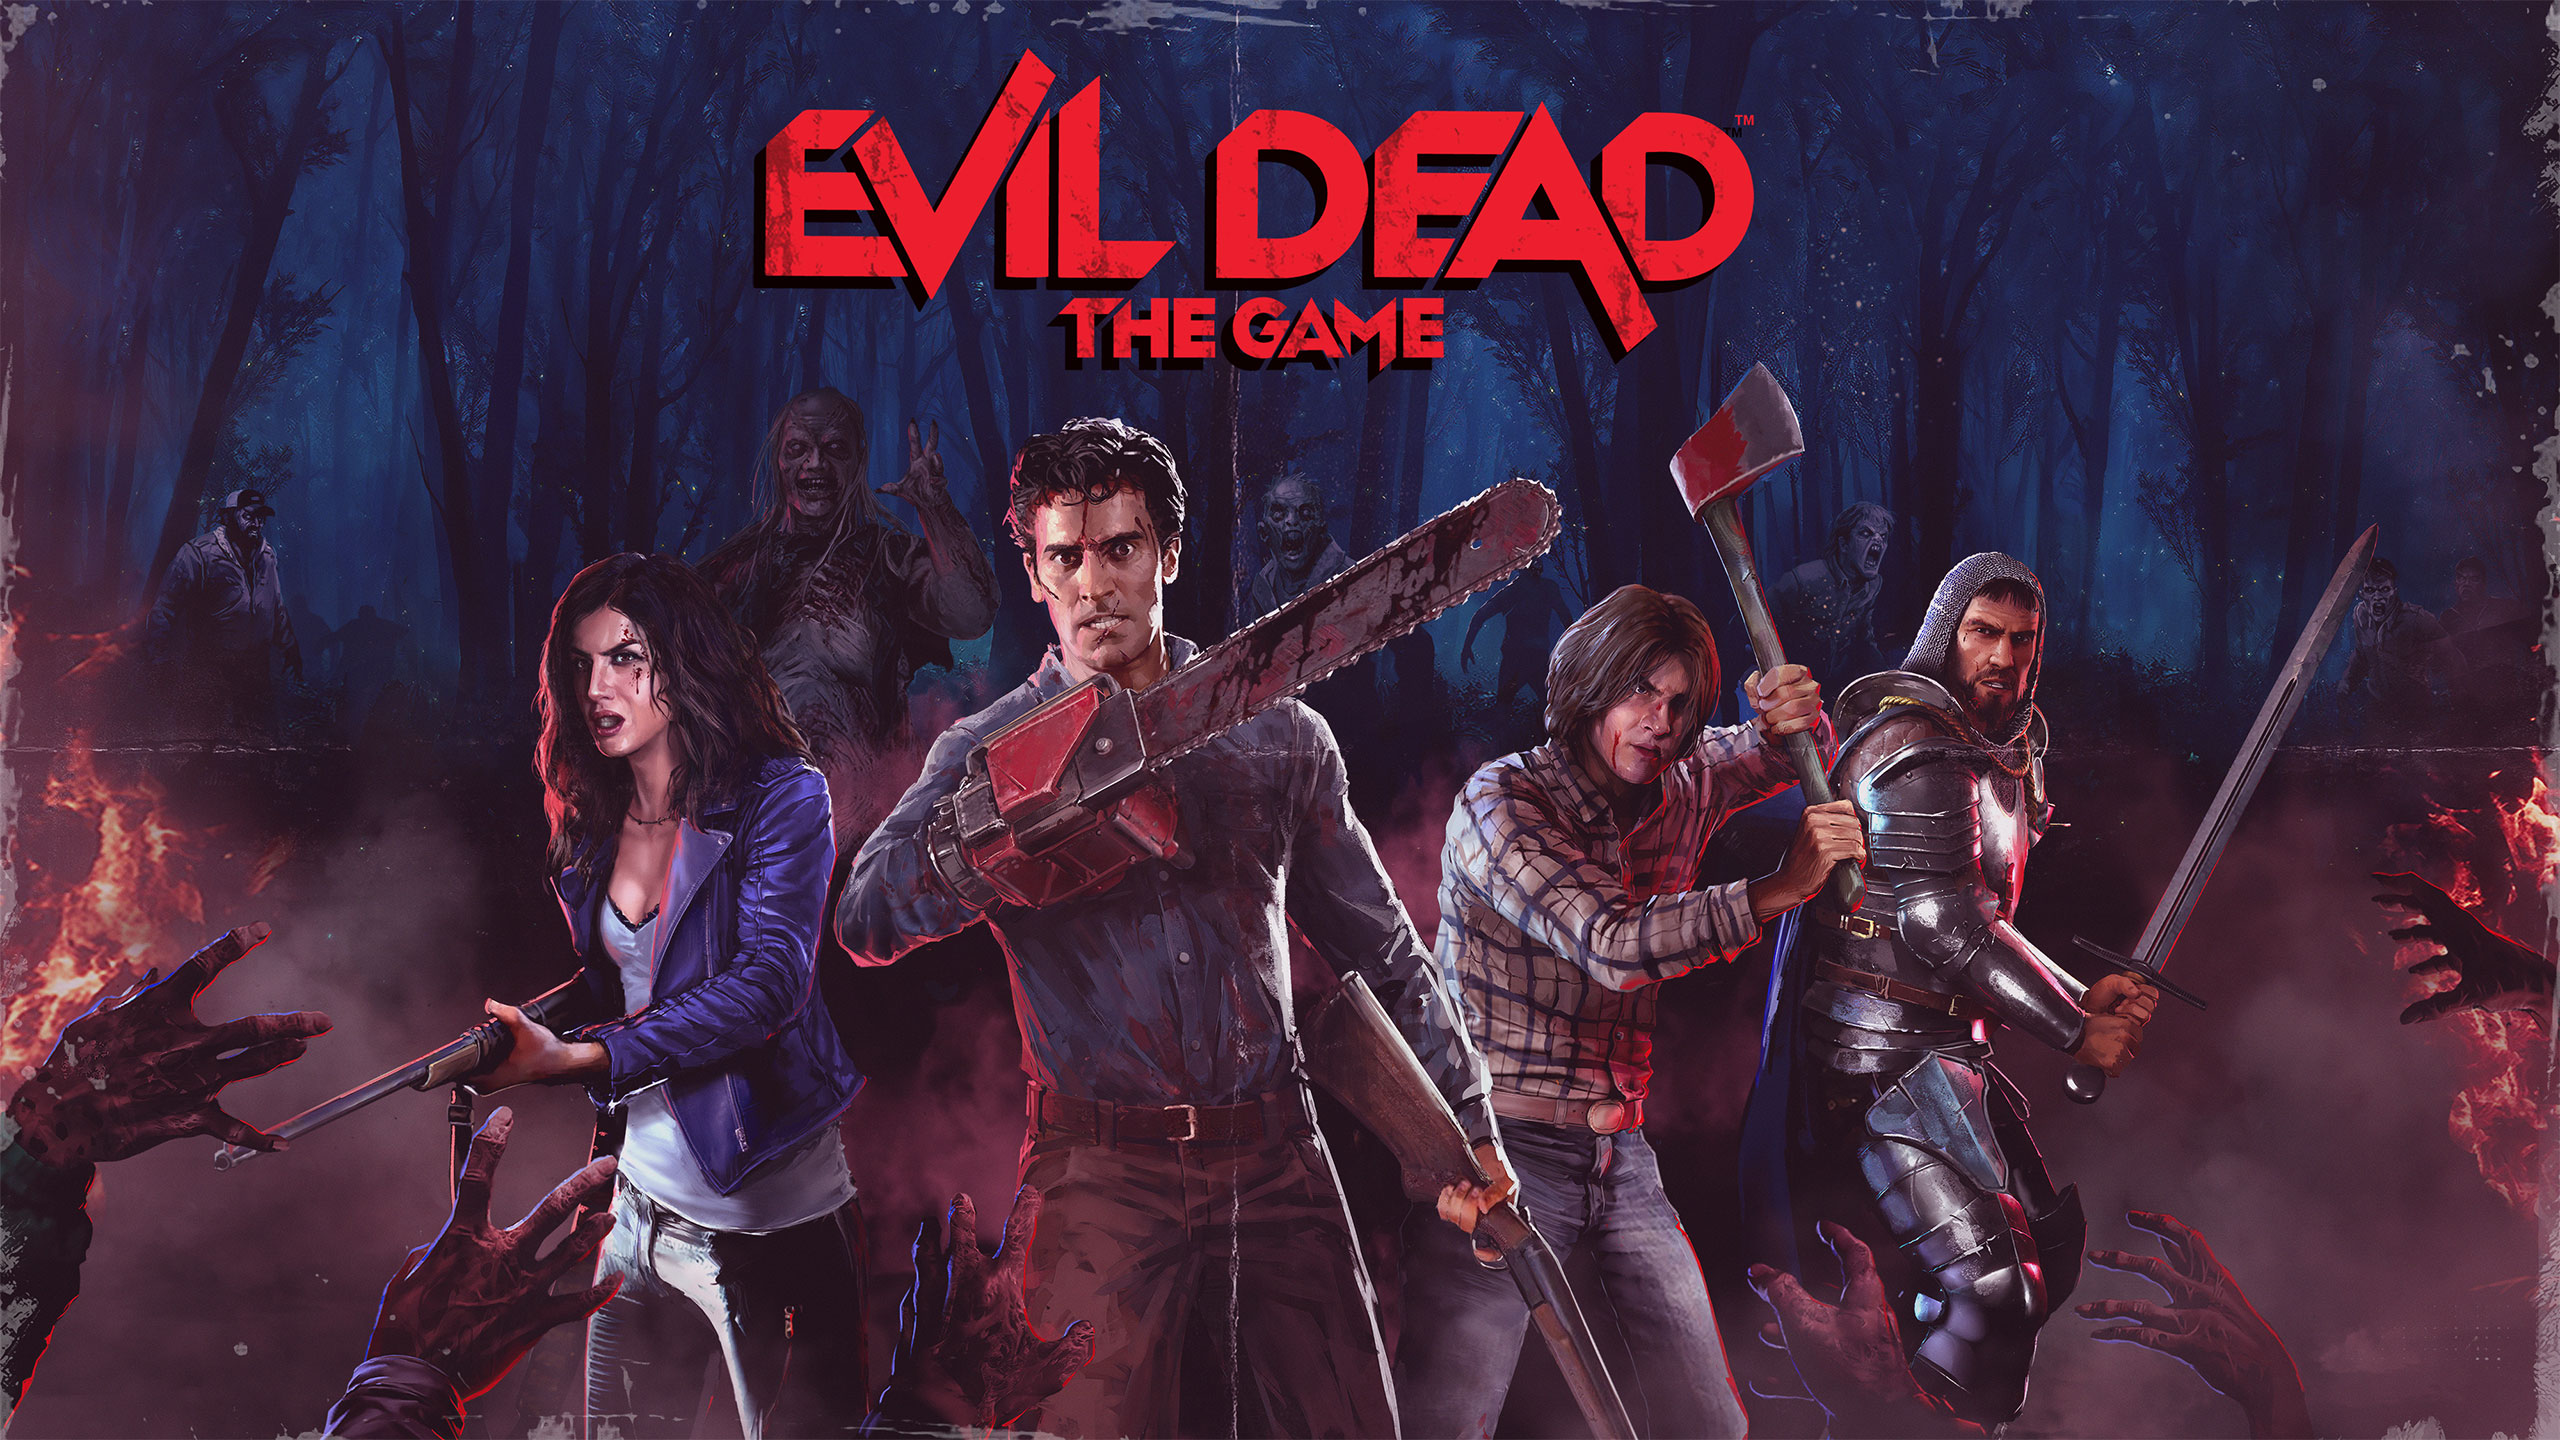 How to Build a Gaming PC for Evil Dead: The Game